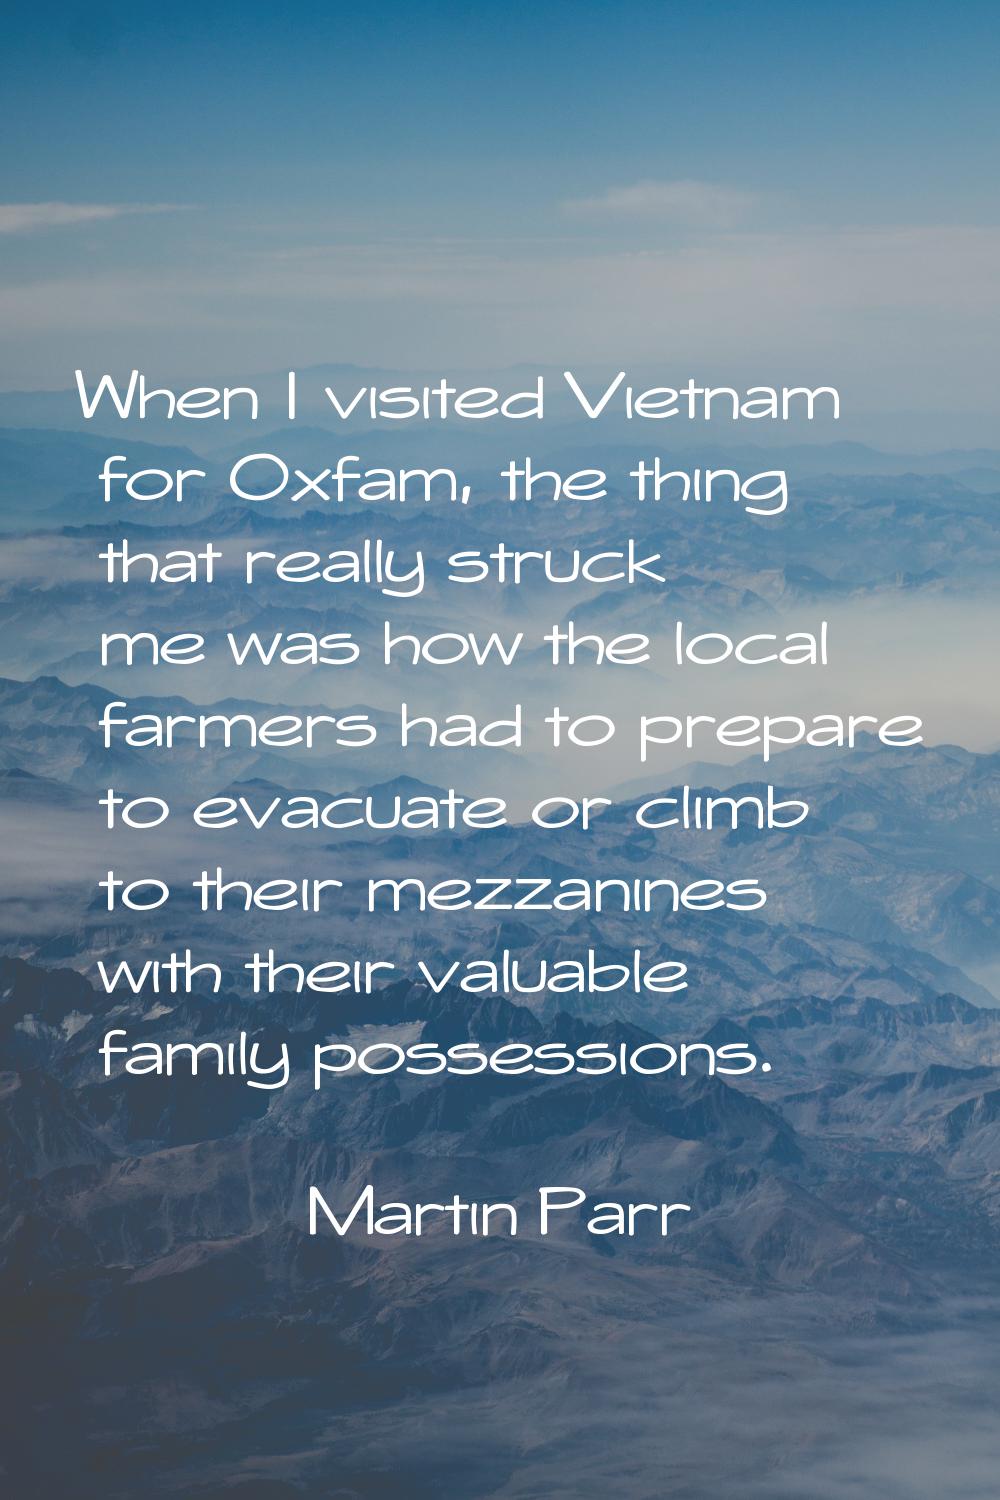 When I visited Vietnam for Oxfam, the thing that really struck me was how the local farmers had to 